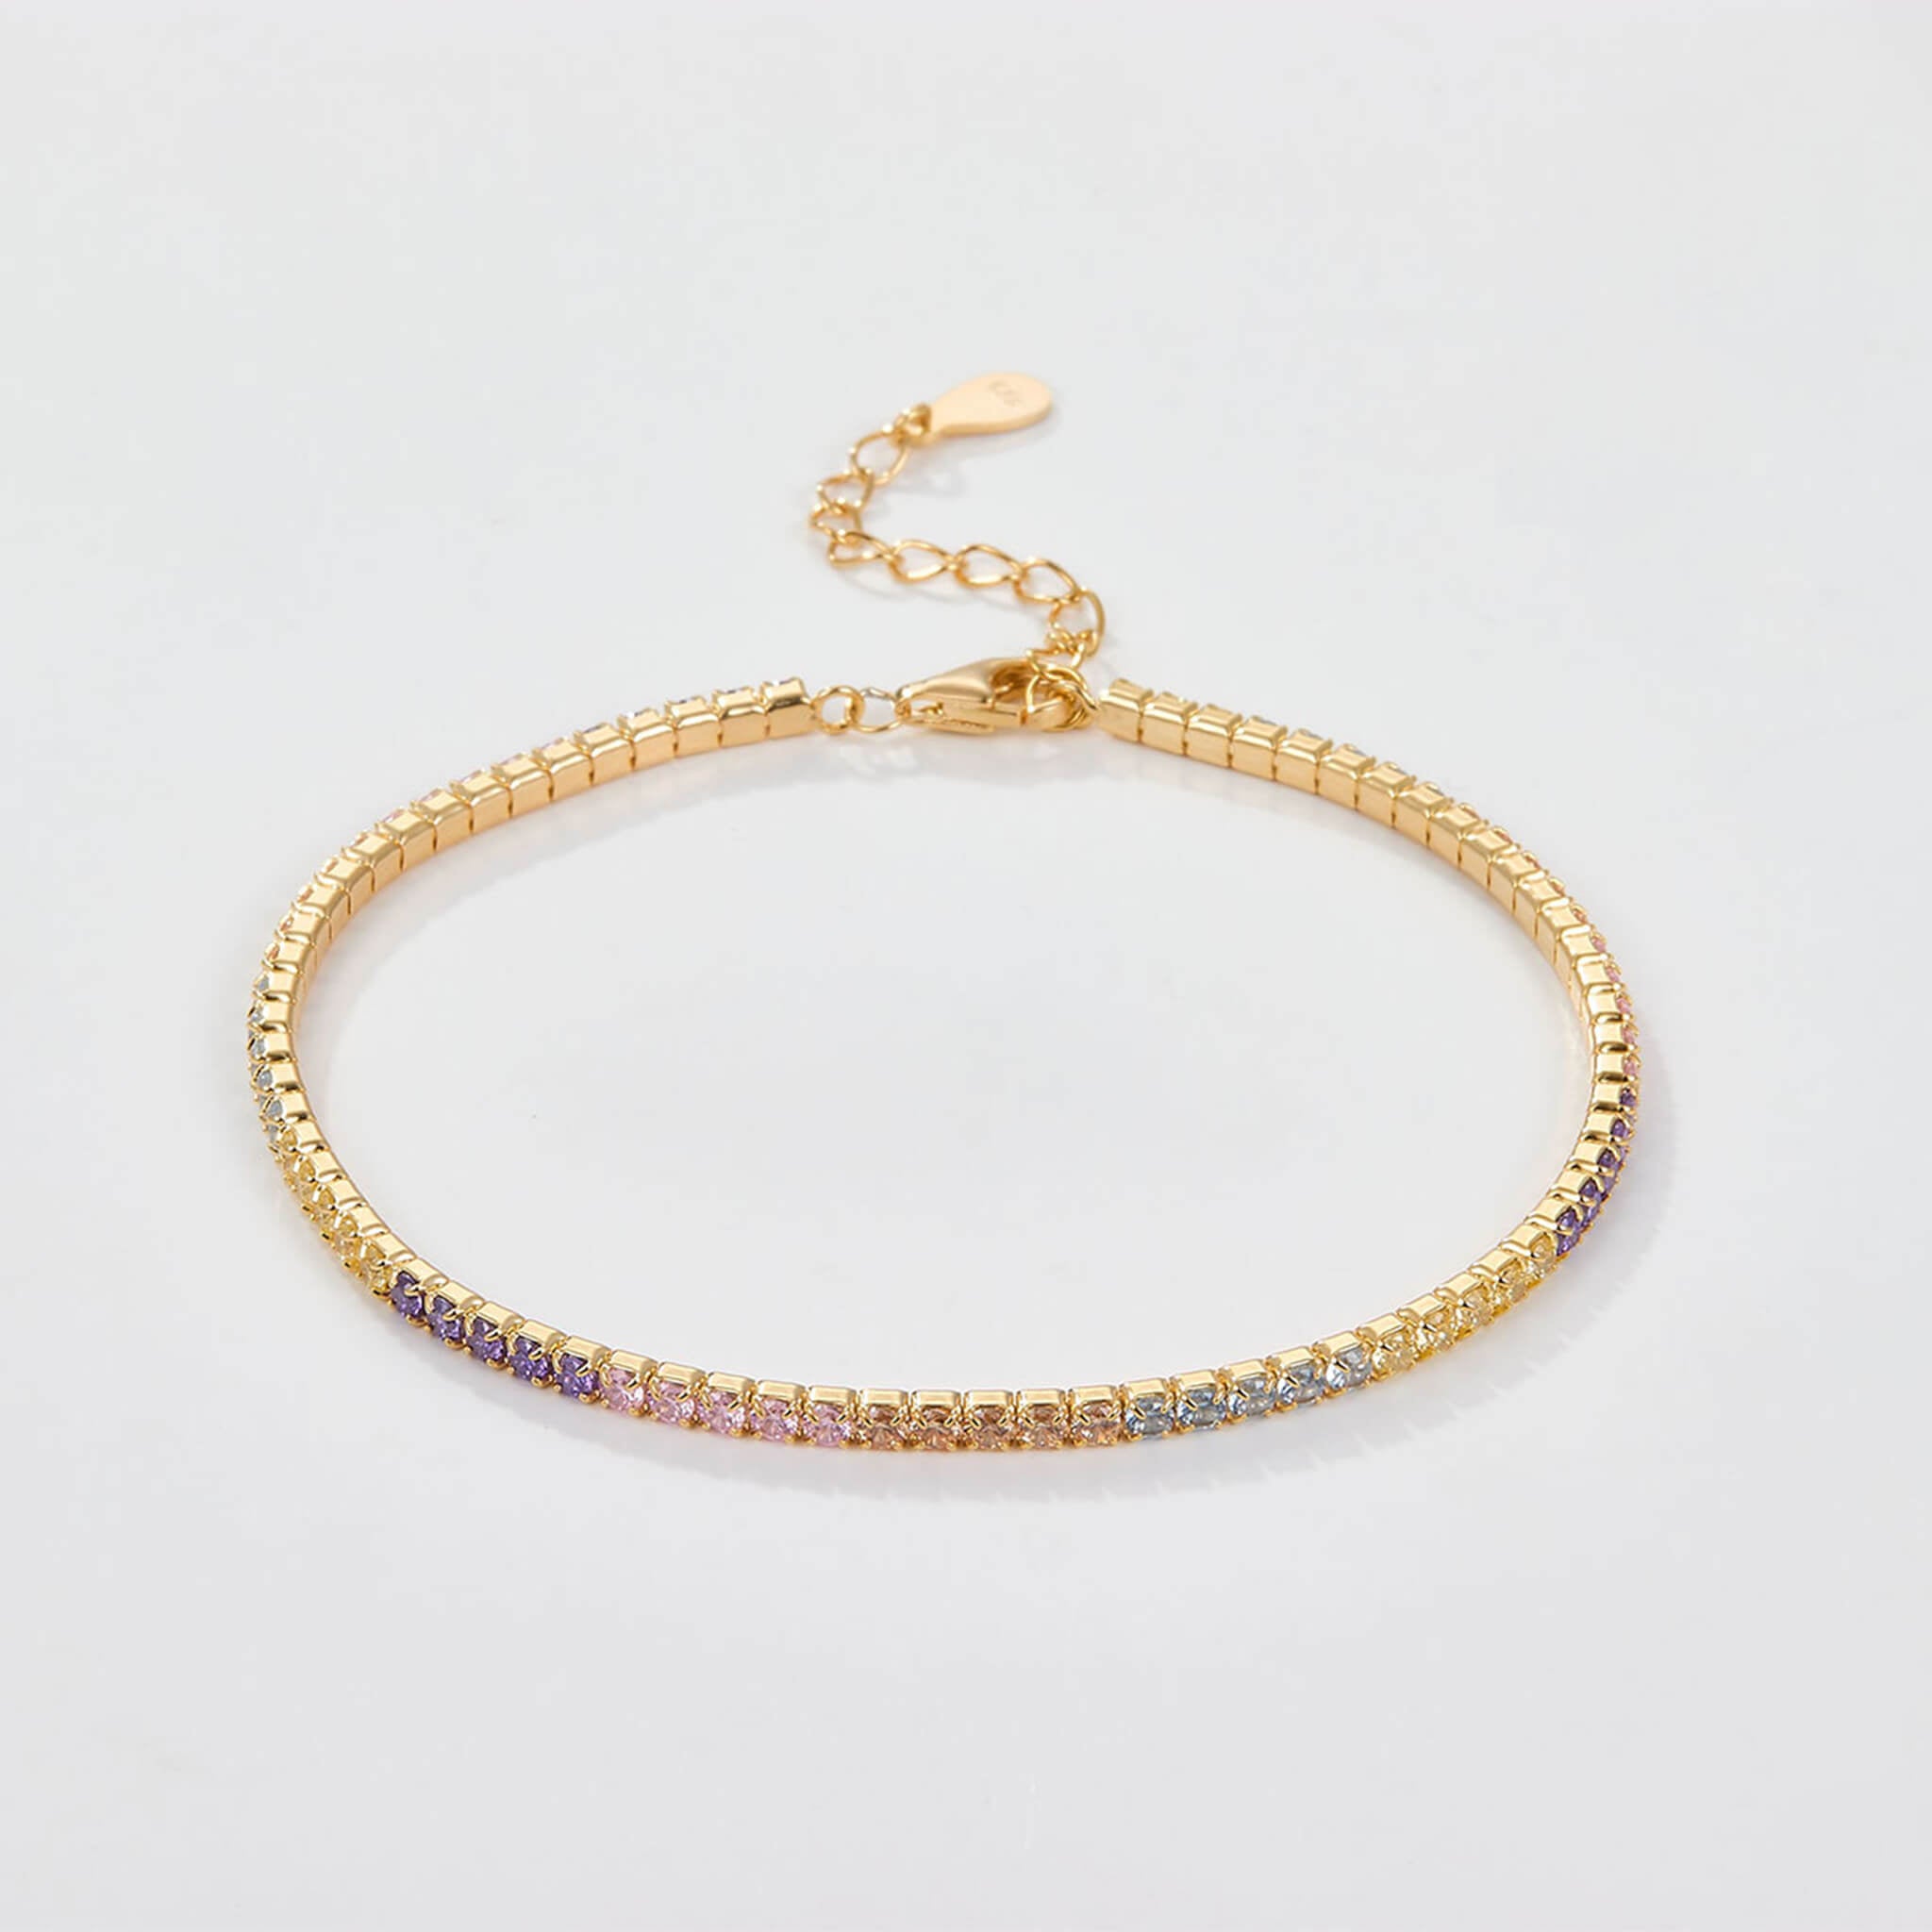 Women's Minimalist Fashion 925 Silver Stacking Colorful Zircon Inlay Bracelet  UponBasics 5 Color 925 Silver 